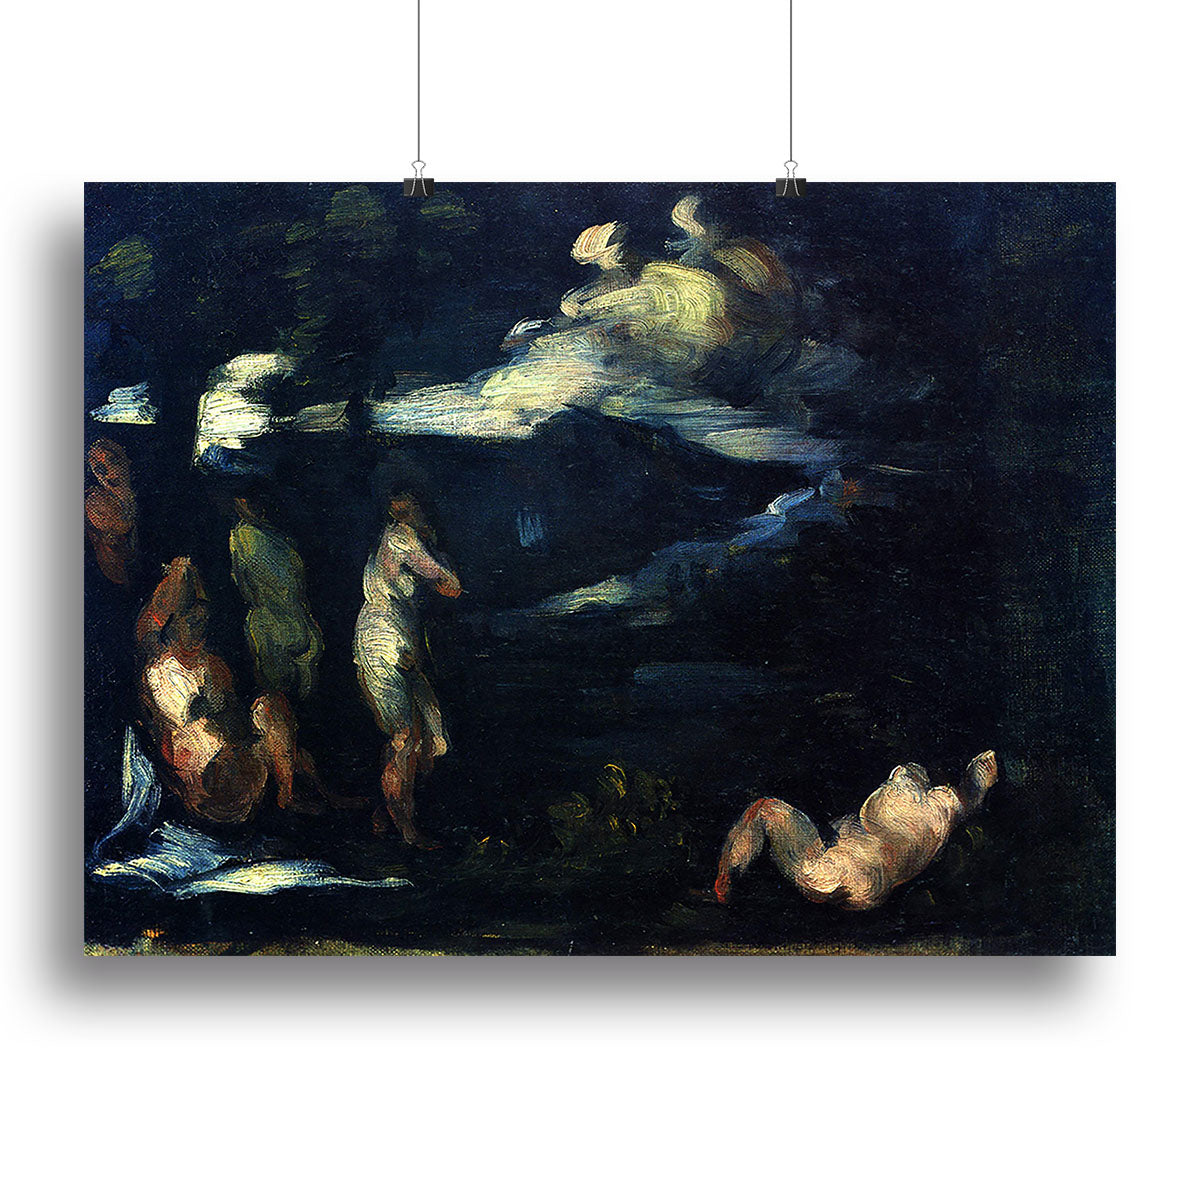 More Bathers by Cezanne Canvas Print or Poster - Canvas Art Rocks - 2